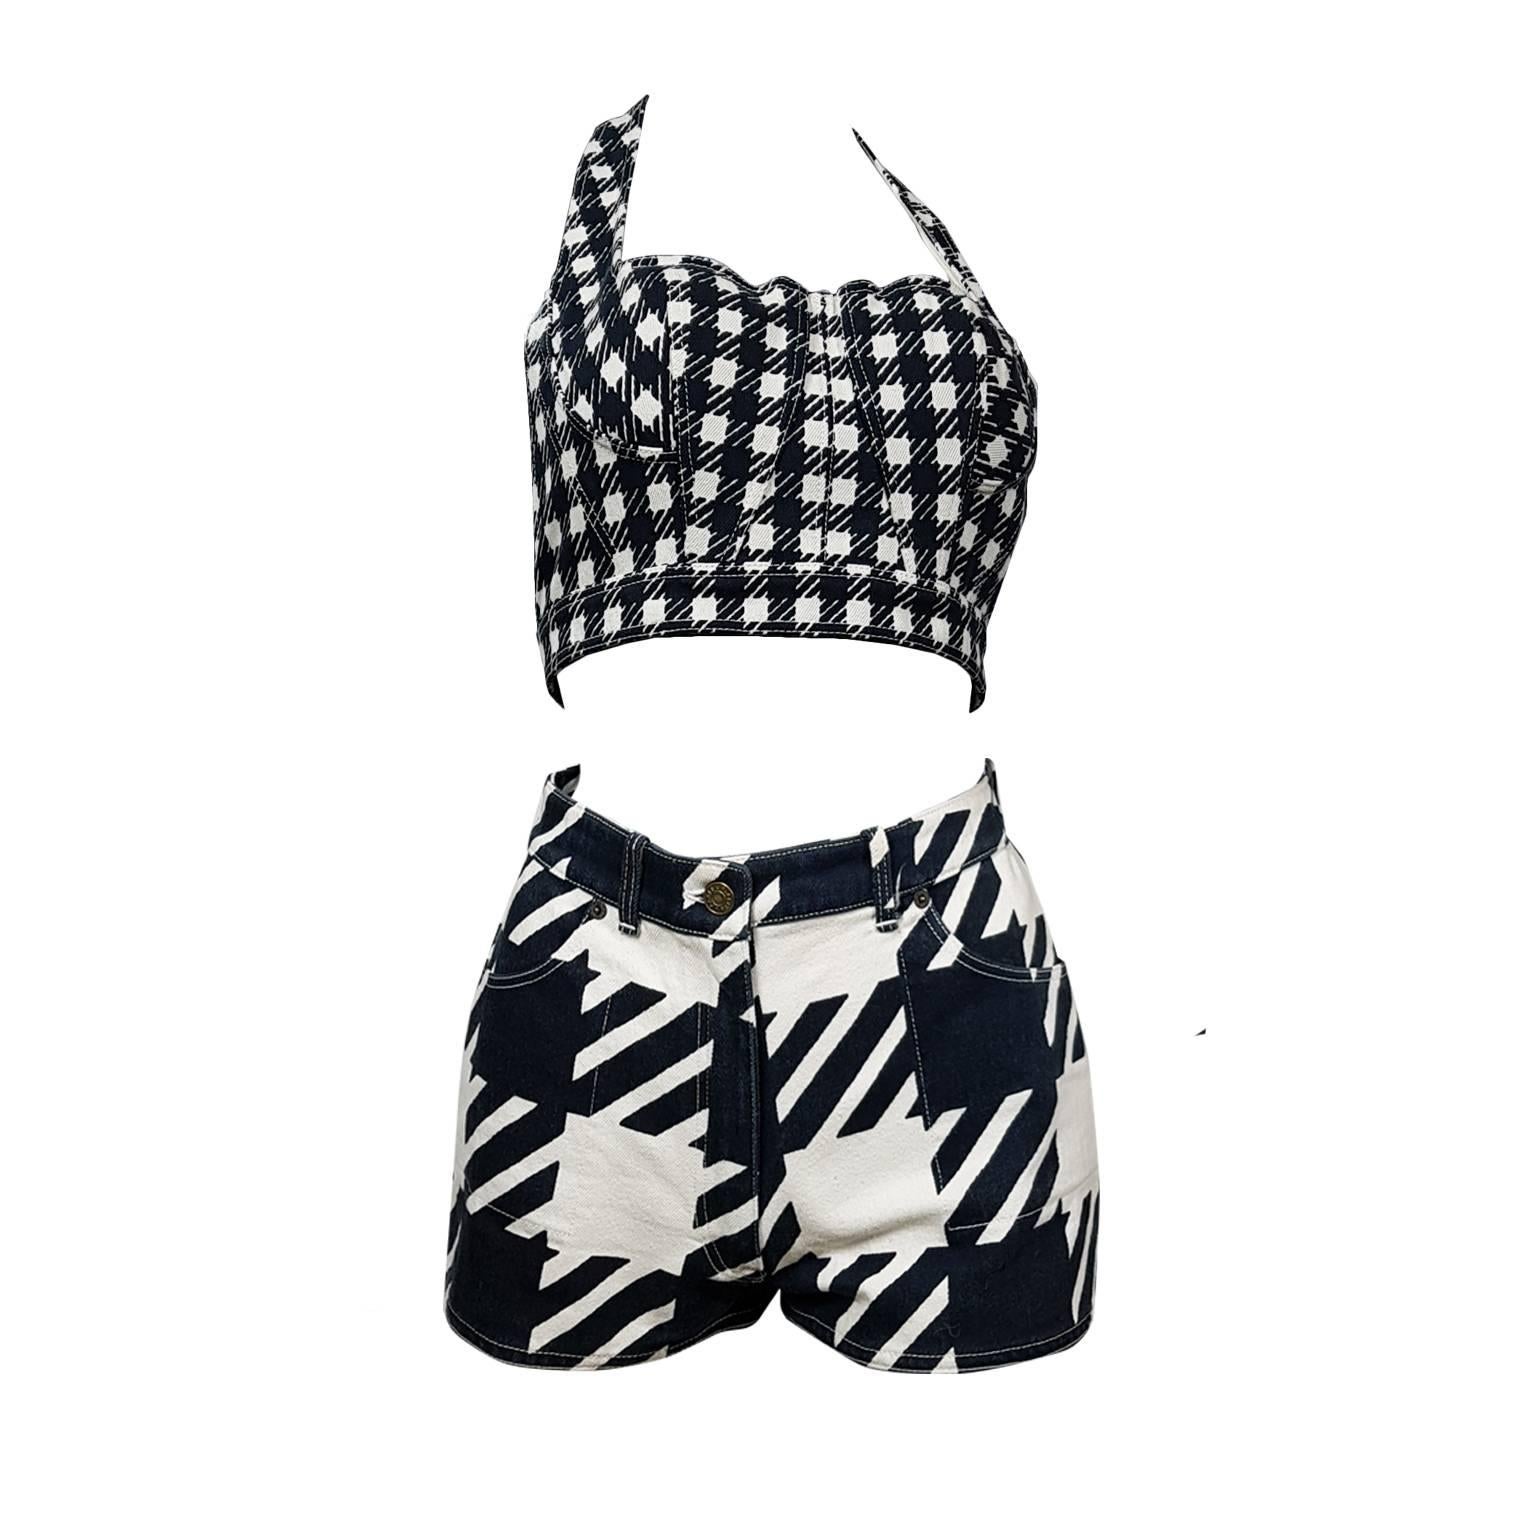 Azzedine Alaia dark navy / white checked printed denim bustier, shorts, jacket and skirt from iconic 